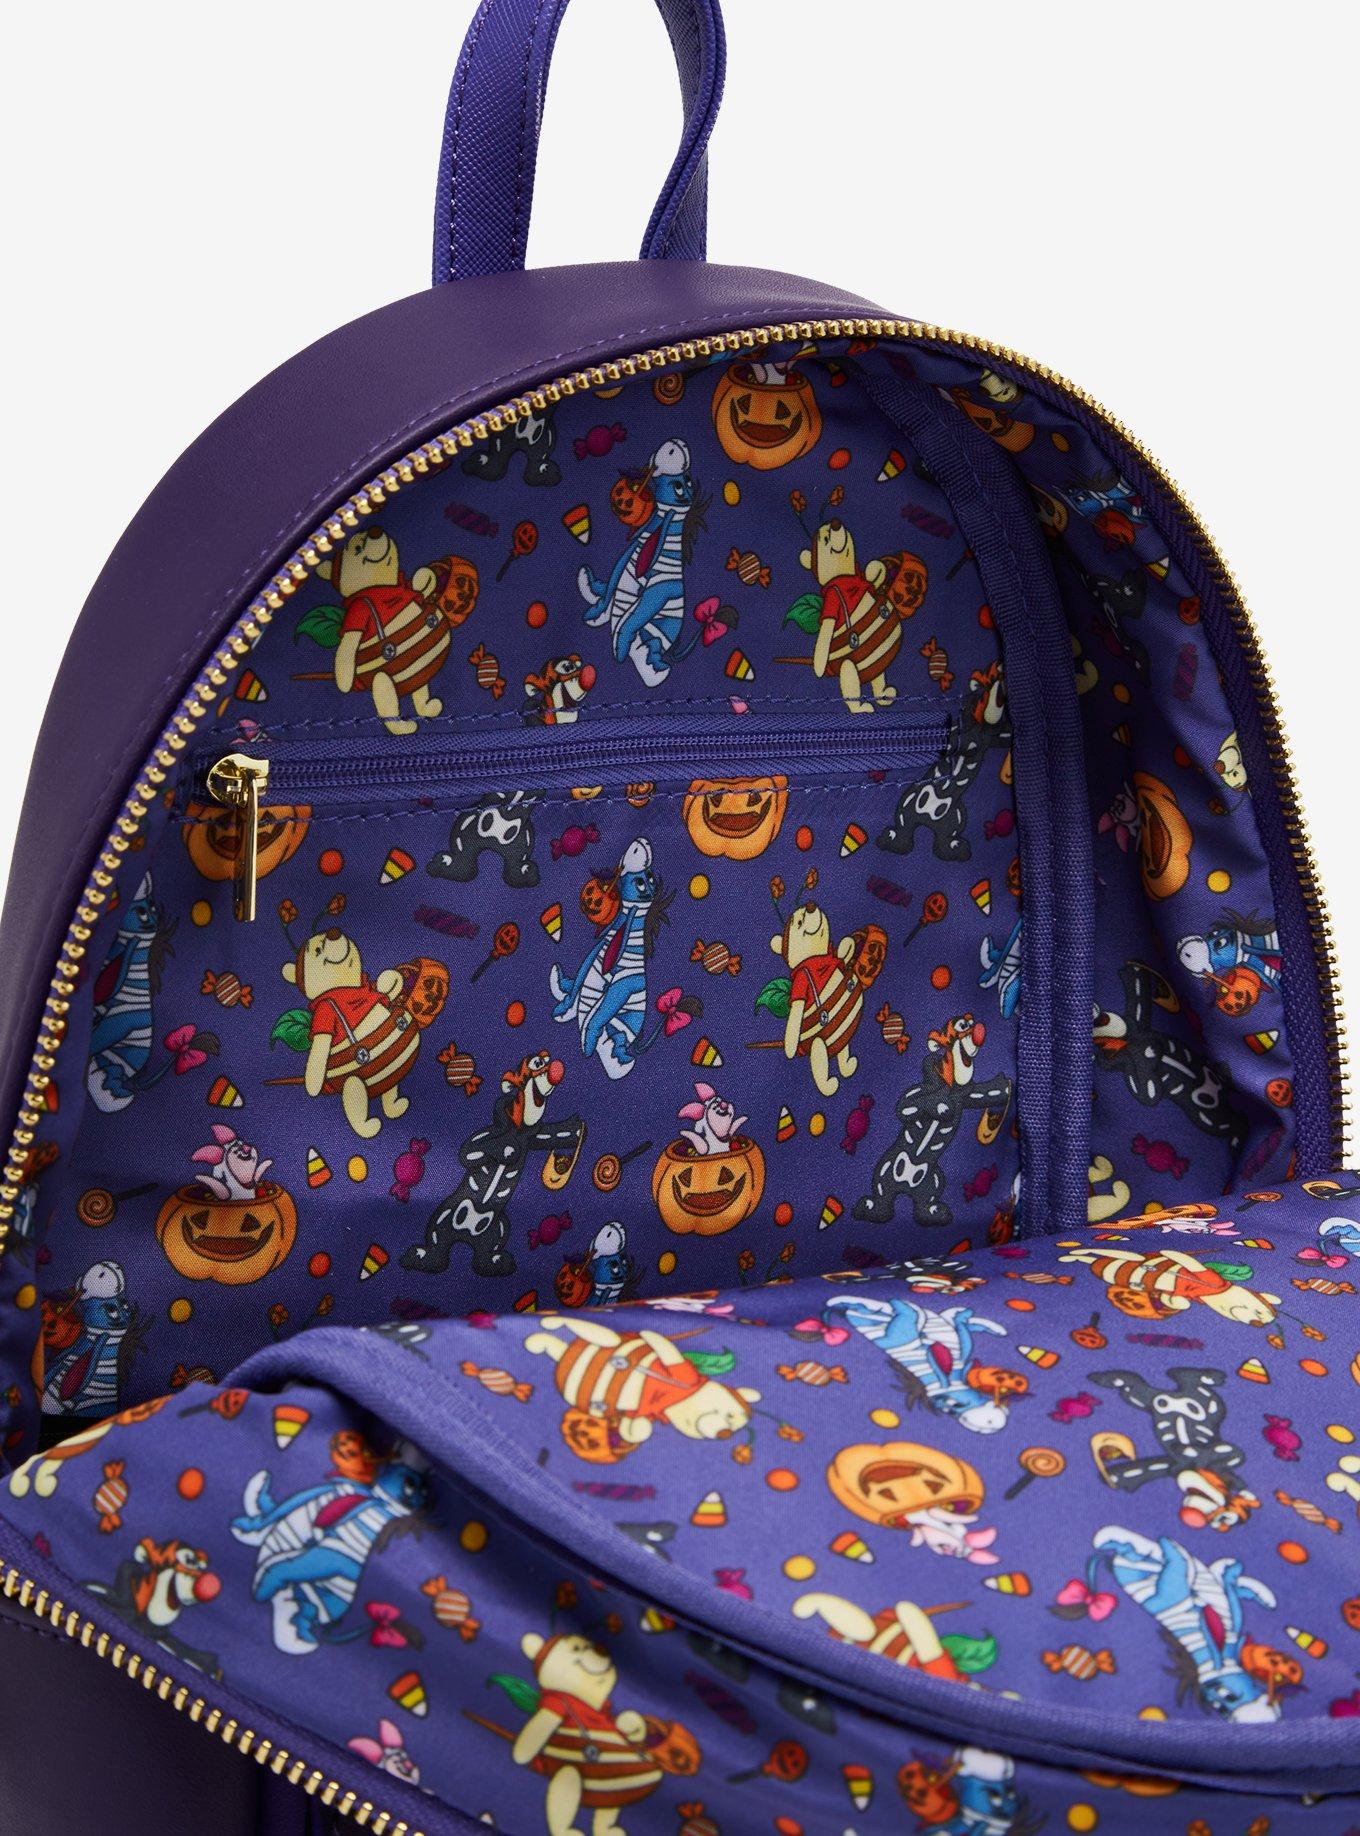 Loungefly Disney Winnie the Pooh Characters Trick-or-Treat Mini Backpack, , alternate